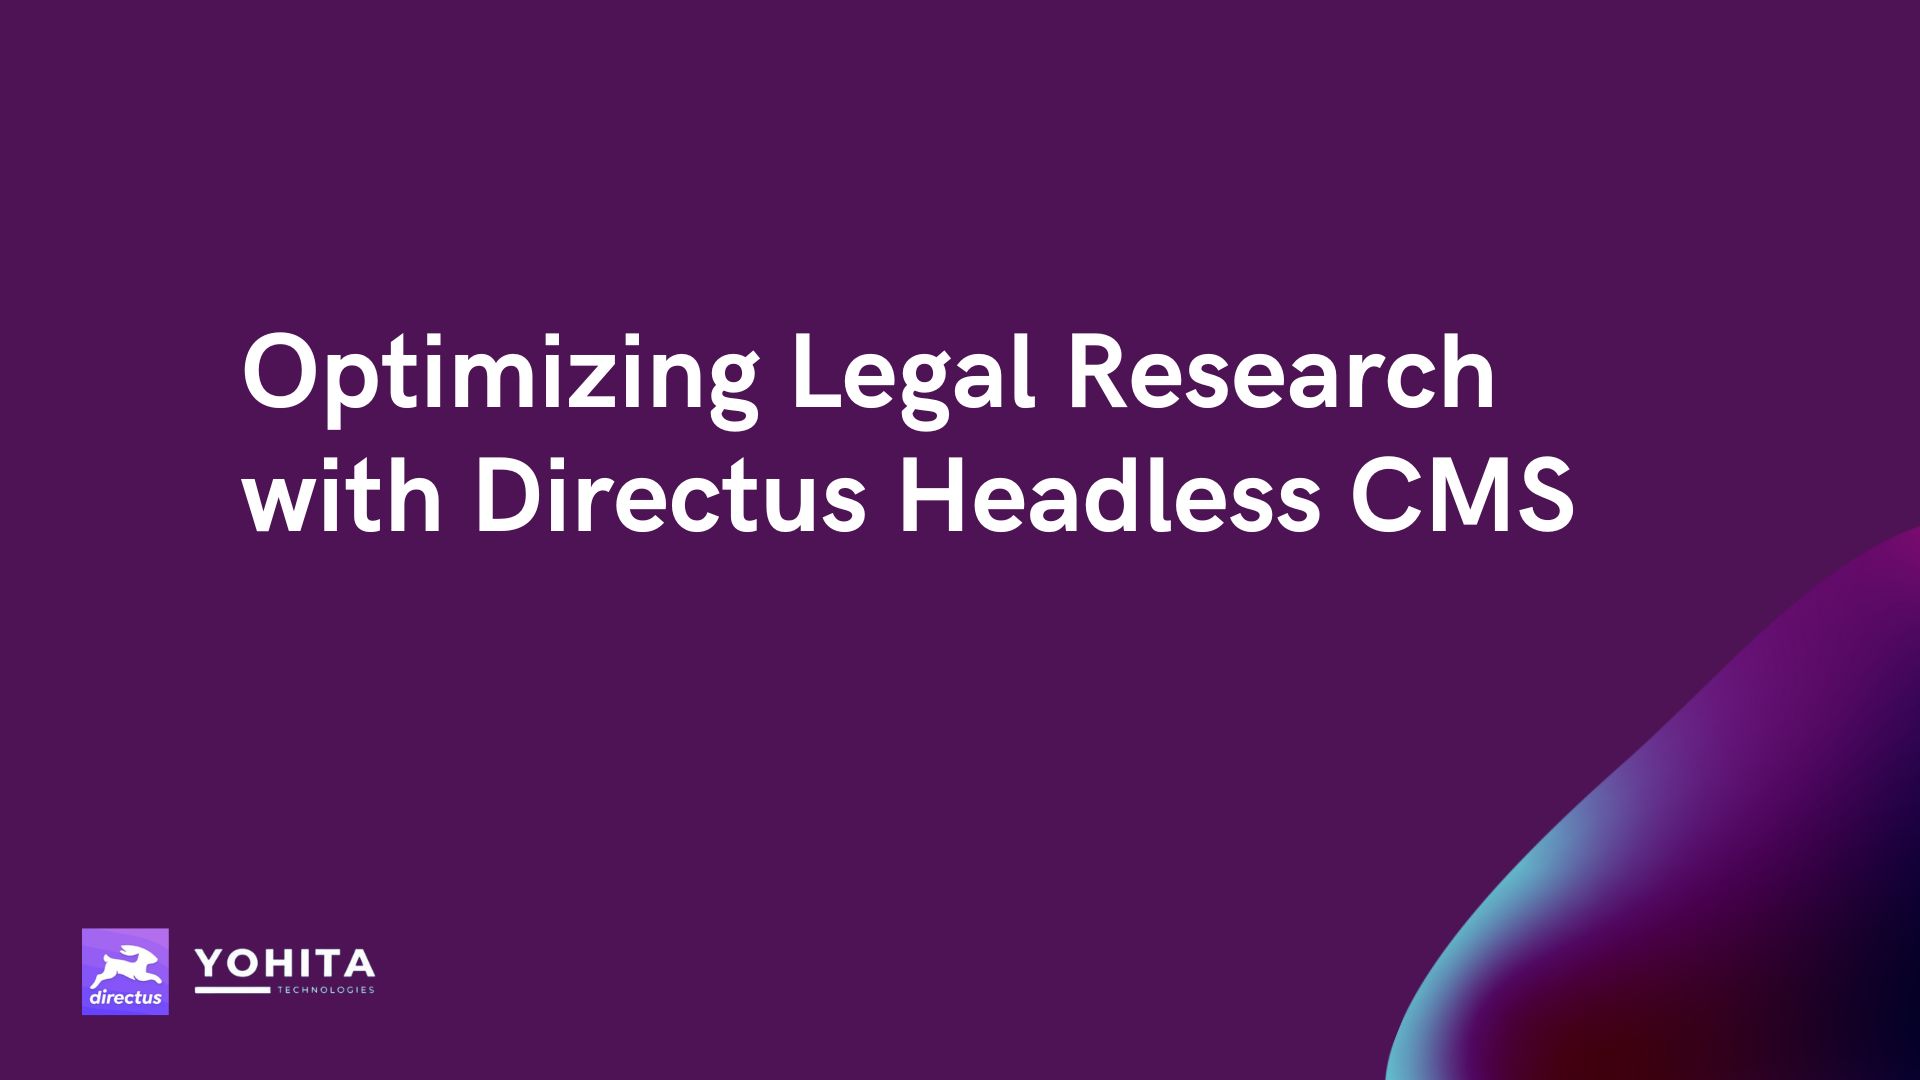 Optimizing Legal Research with Directus Headless CMS